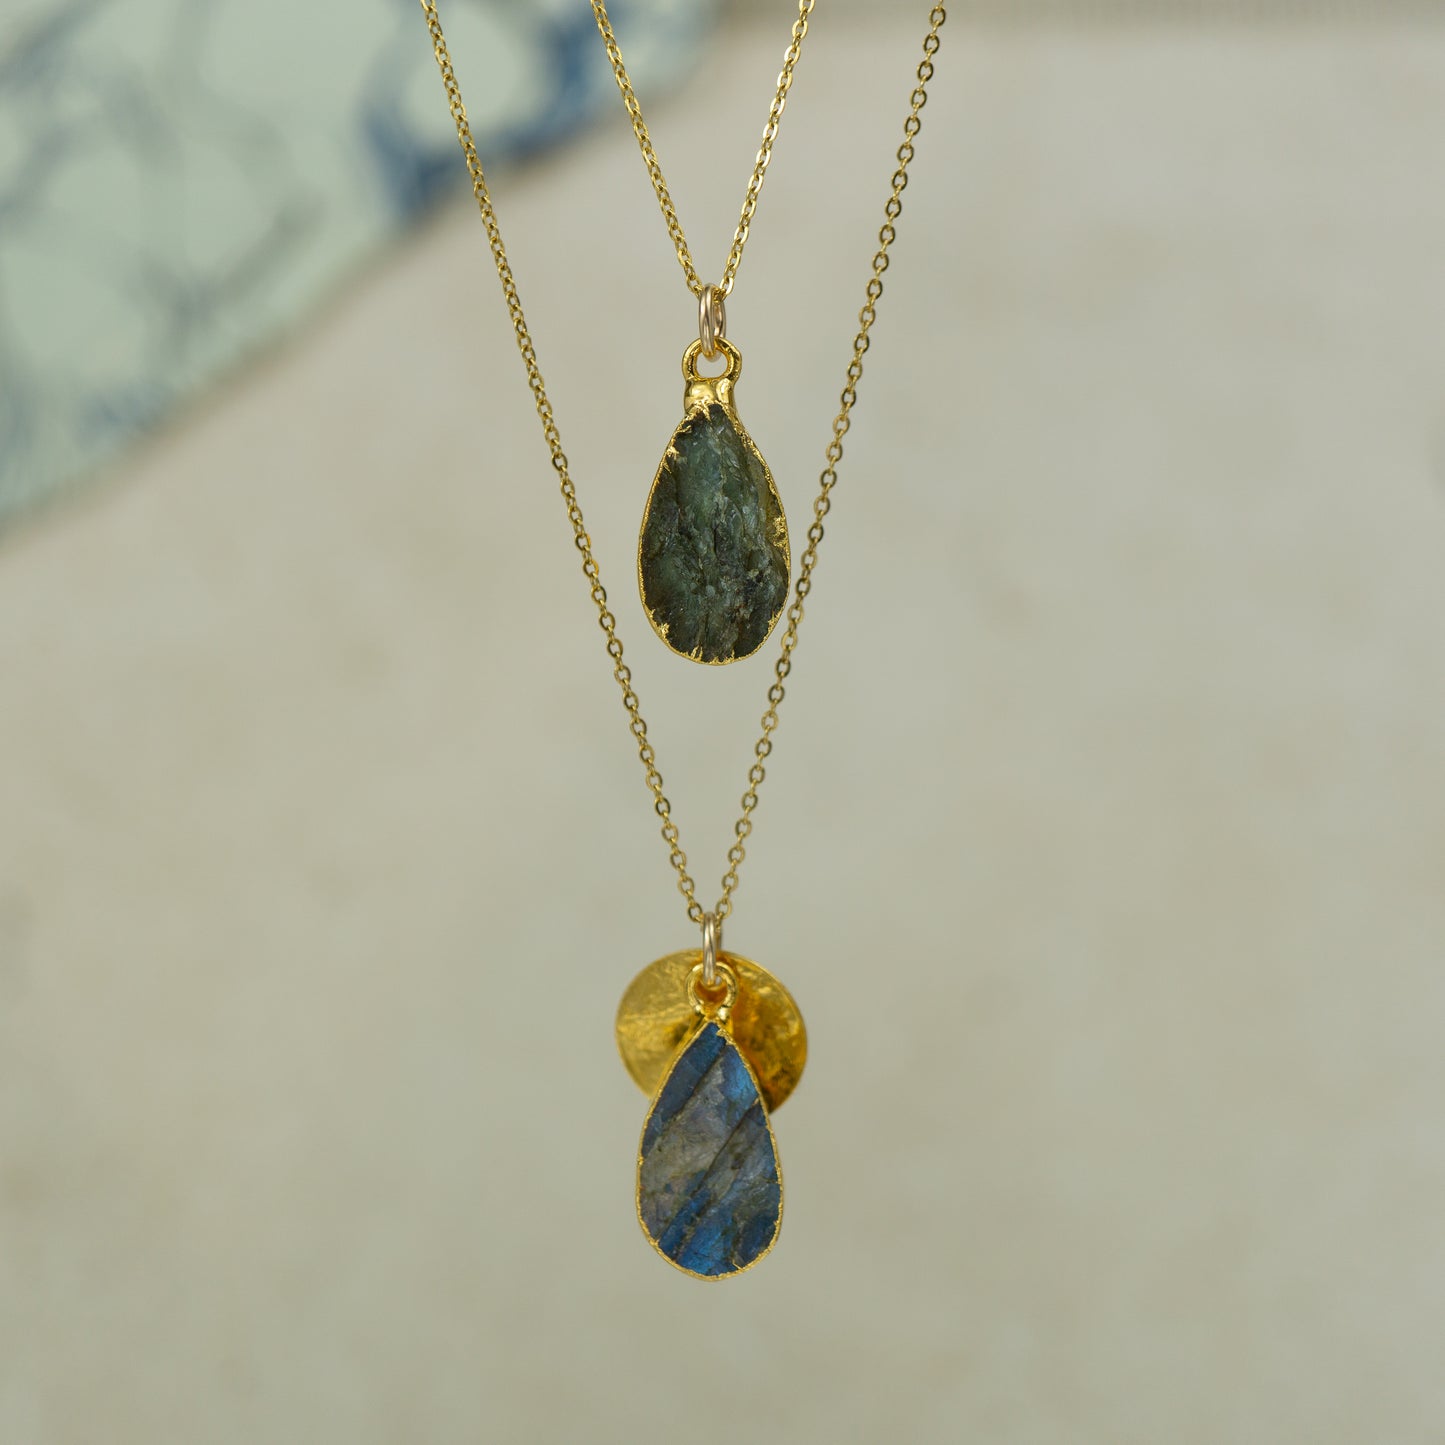 single teardrop raw labradorite pendants finished in gold on a chains. 